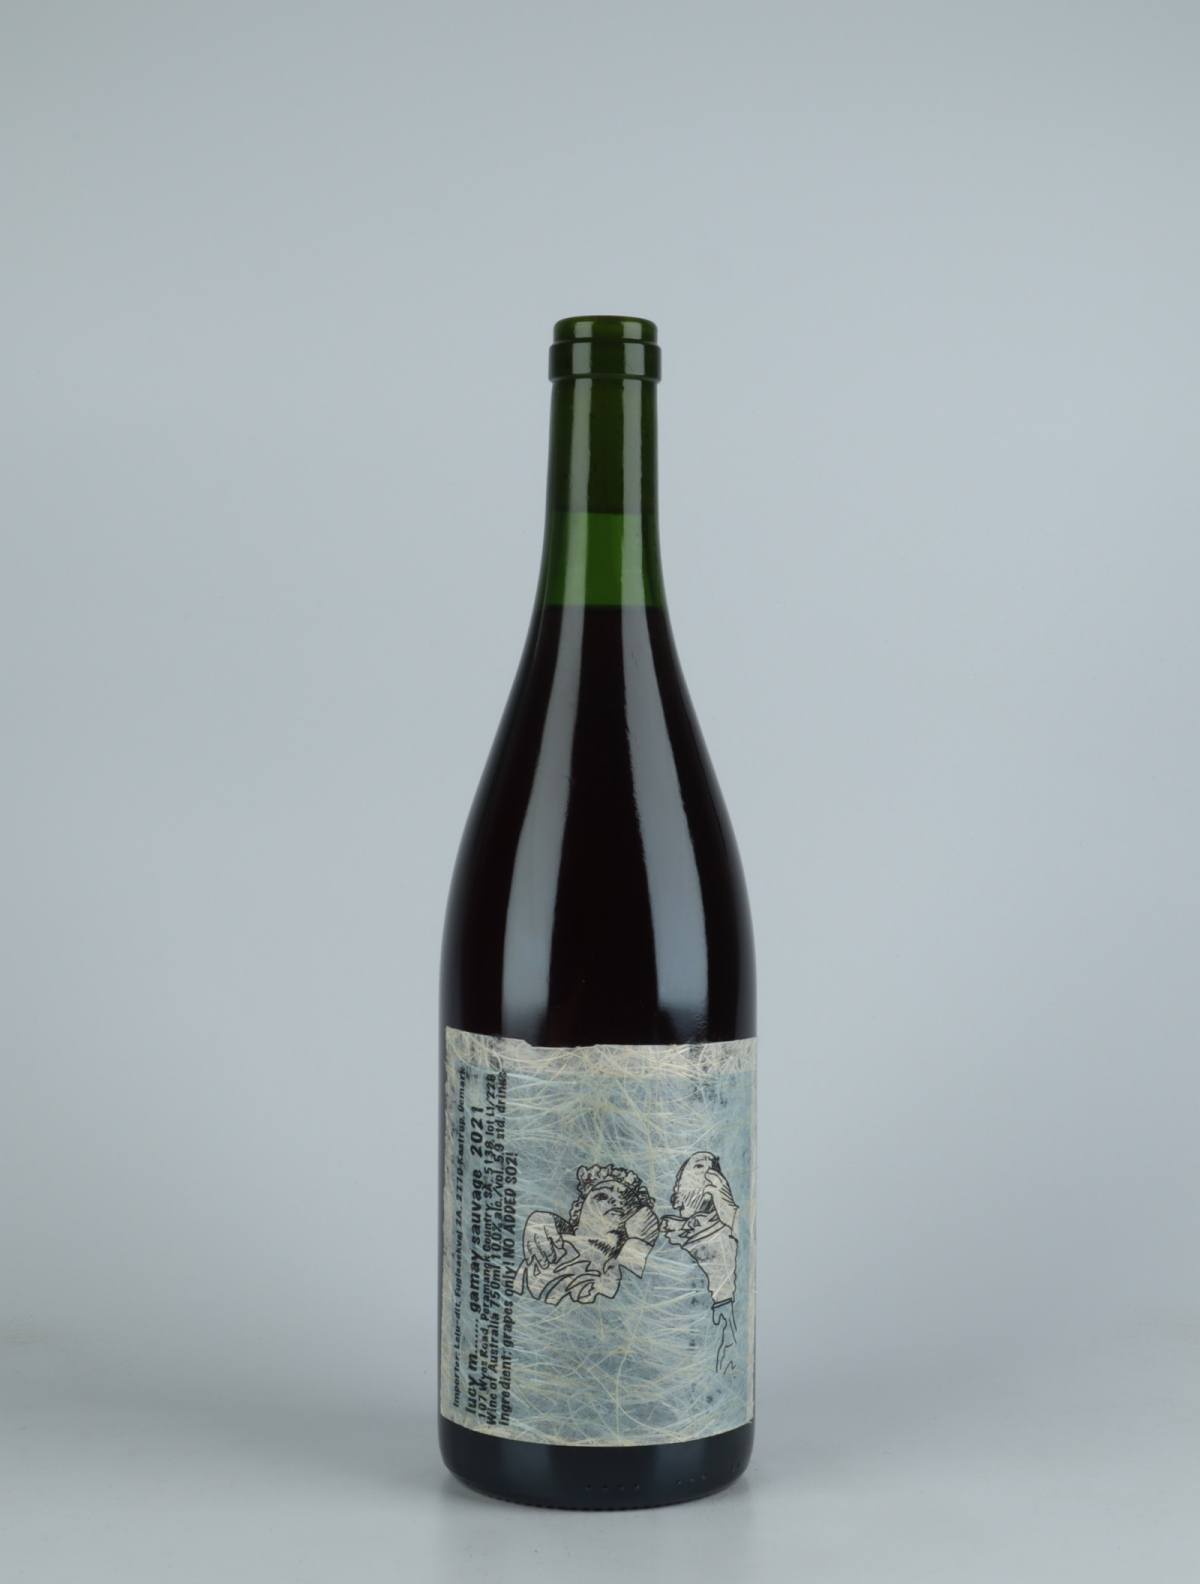 A bottle 2021 Gamay Sauvage Red wine from Lucy Margaux, Adelaide Hills in Australia